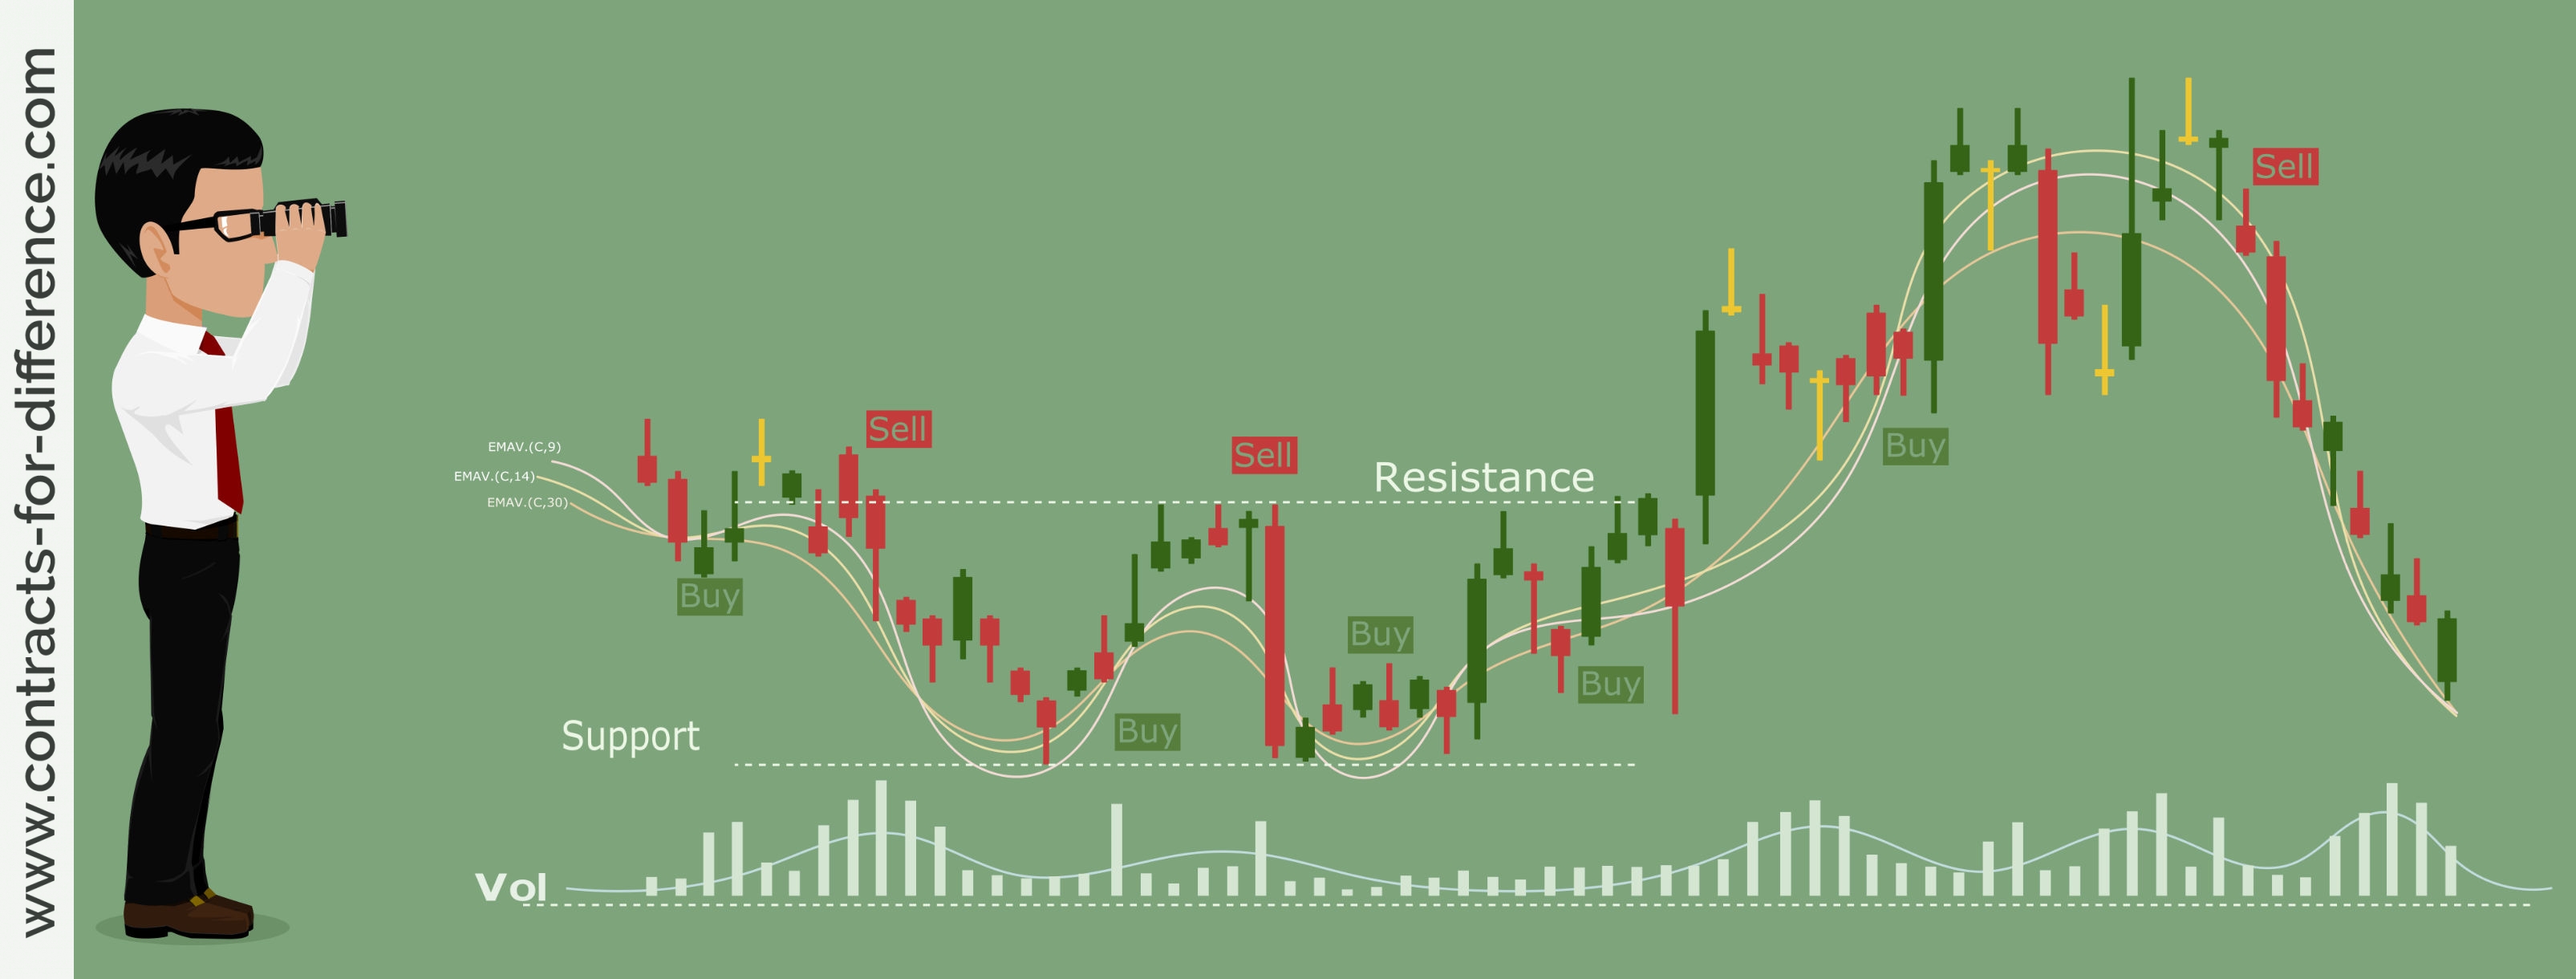 Support and Resistance | Contracts-For-Difference.com